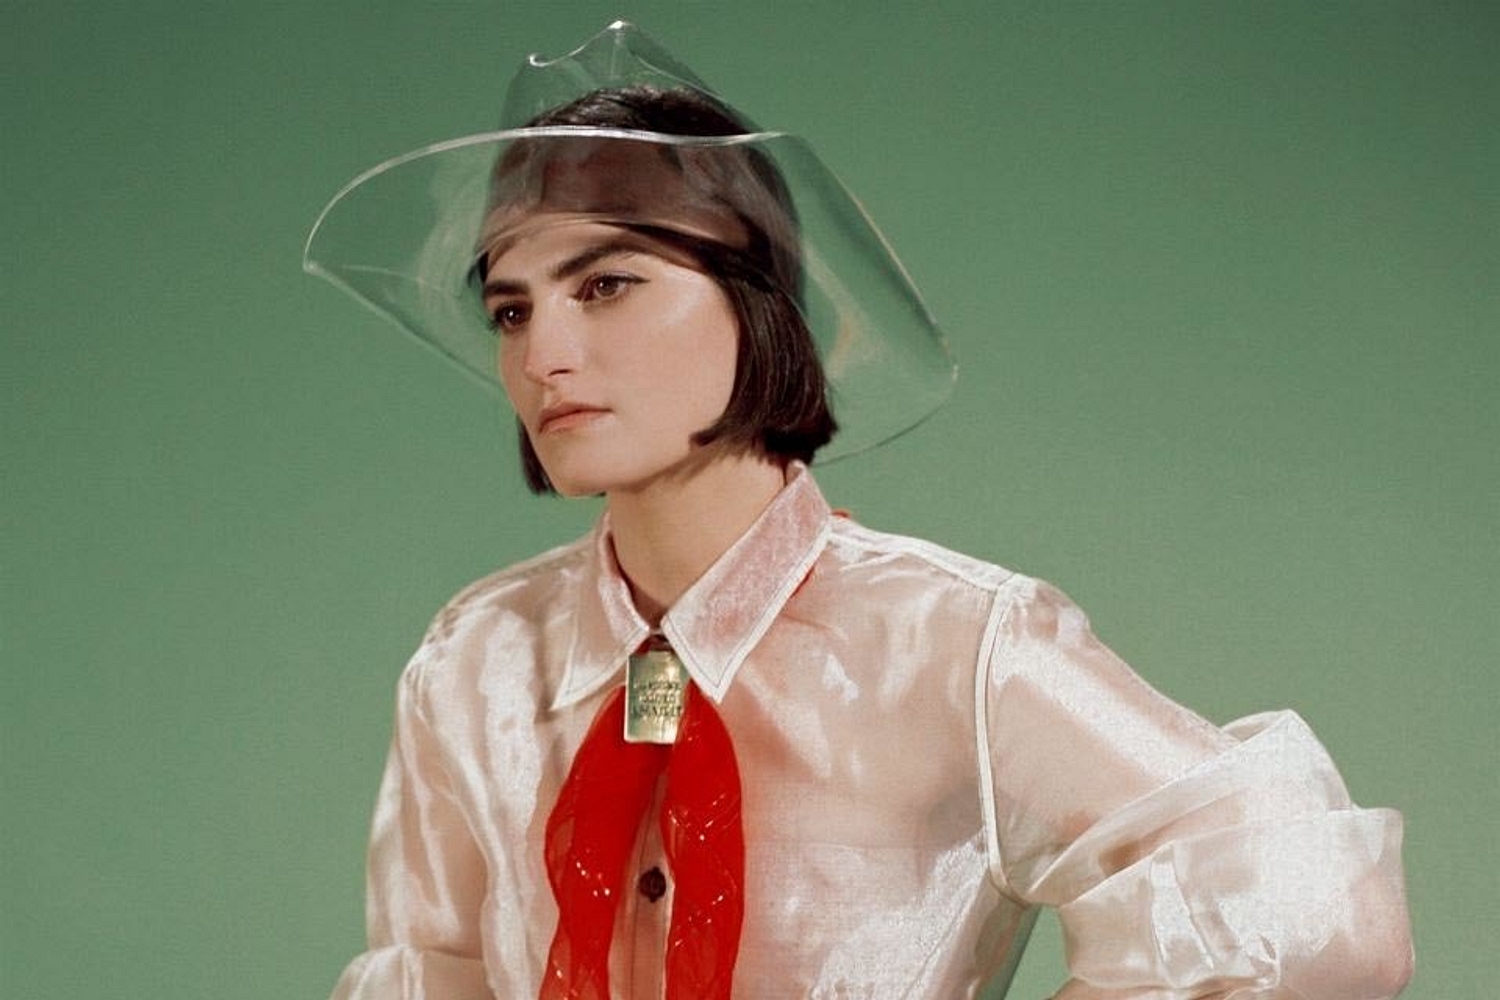 Mattiel celebrates release-day for second album ‘Satis Factory’ with a new video for ‘Food For Thought’